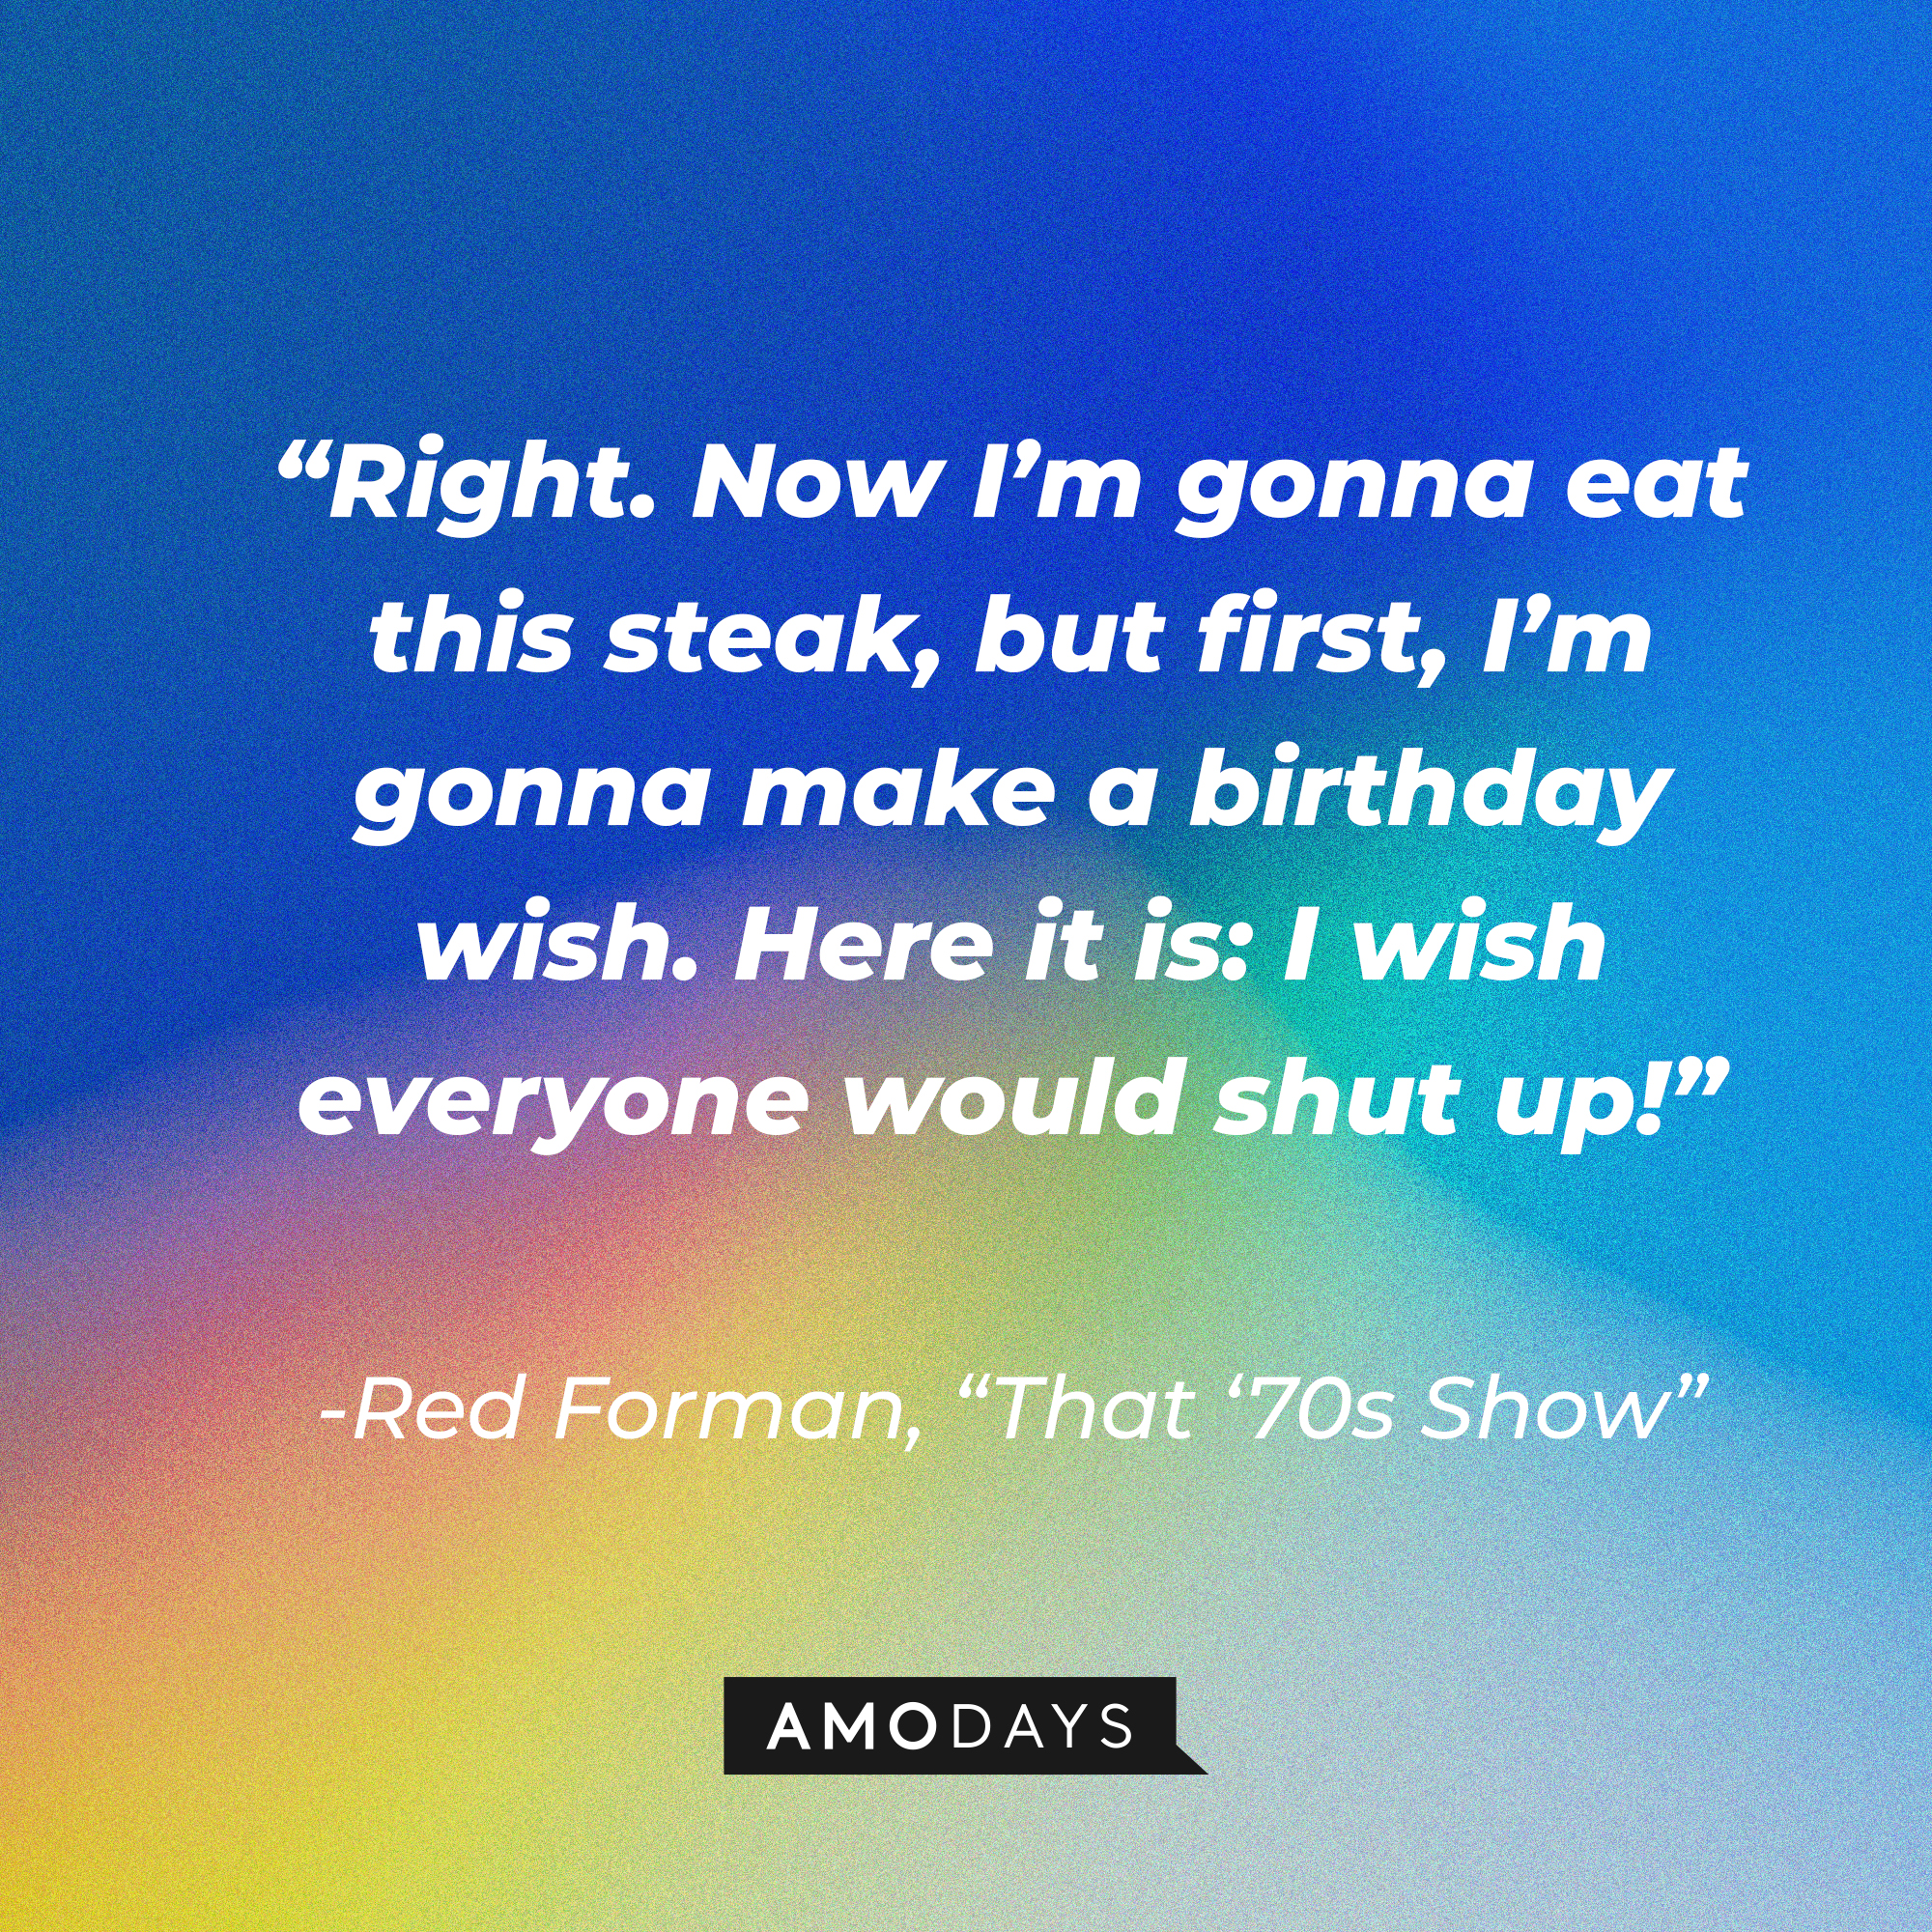 Red Forman's quote from "That '70s Show:" "Right. Now I’m gonna eat this steak, but first, I’m gonna make a birthday wish. Here it is: I wish everyone would shut up!" | Source: AmoDays